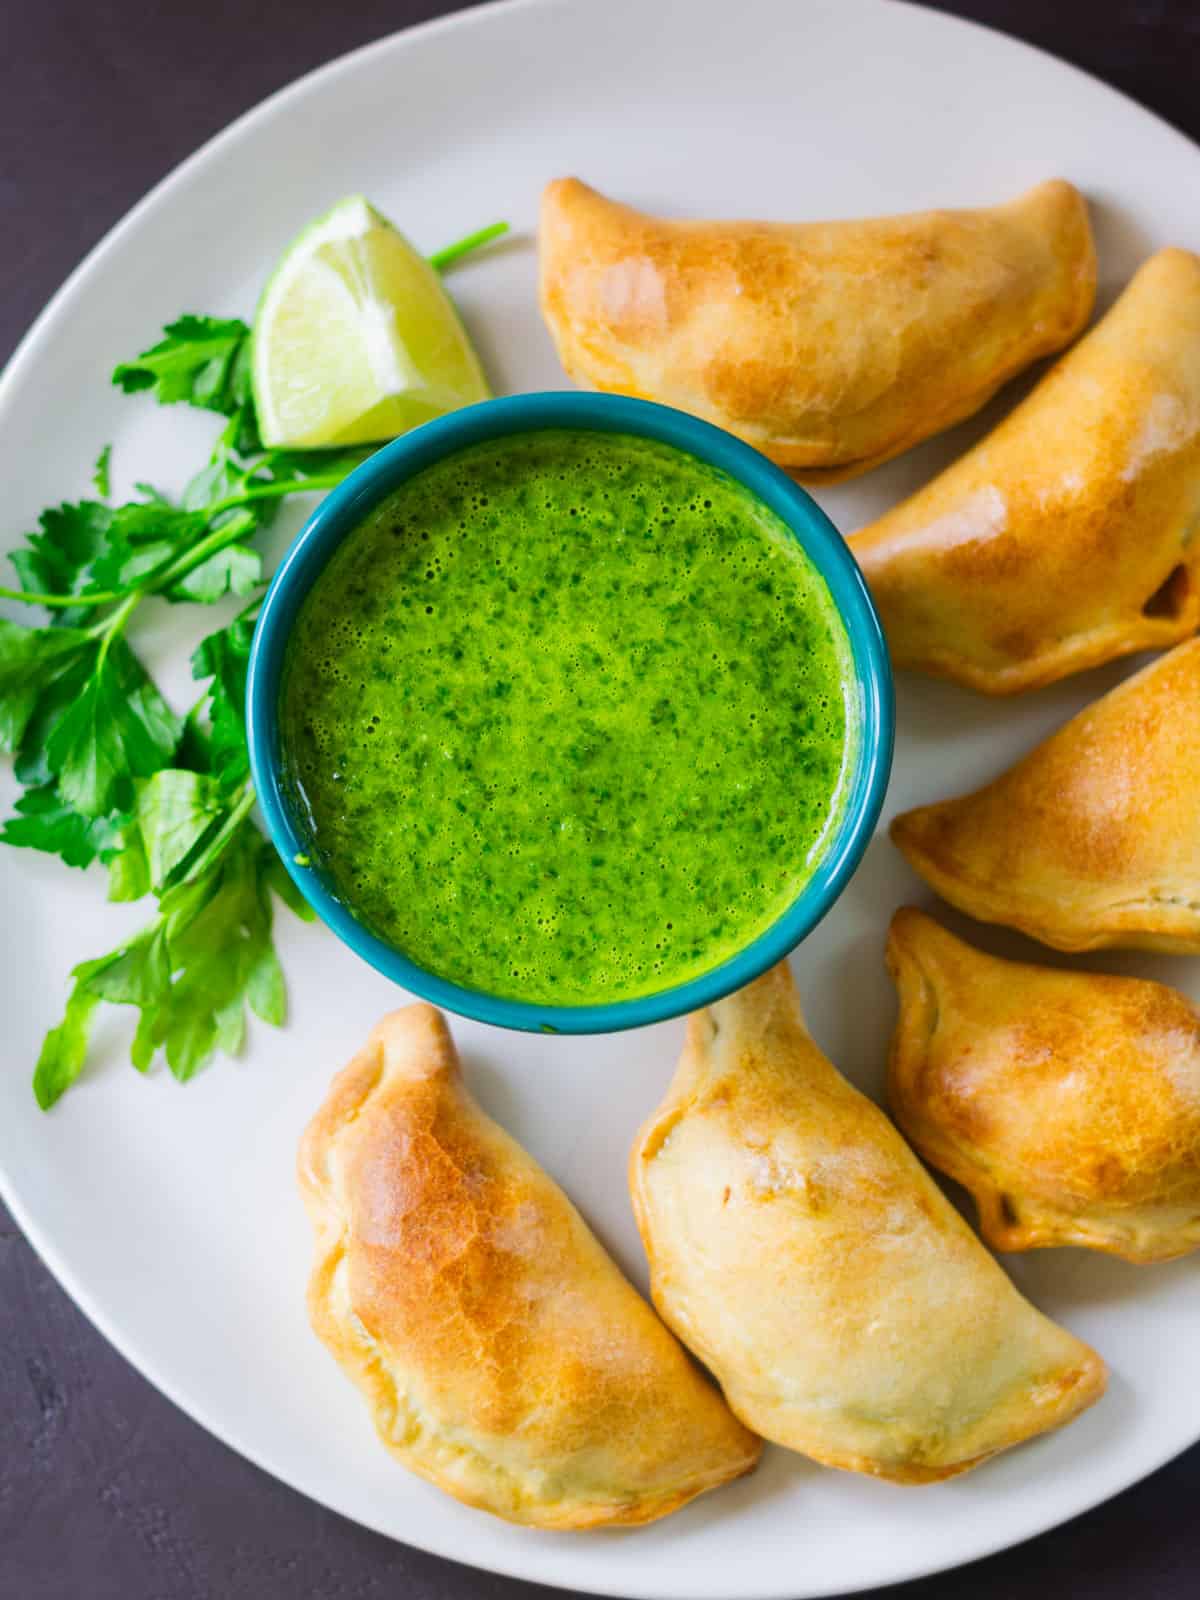 Baked brisket empanadas with chimichurri and fresh lime.